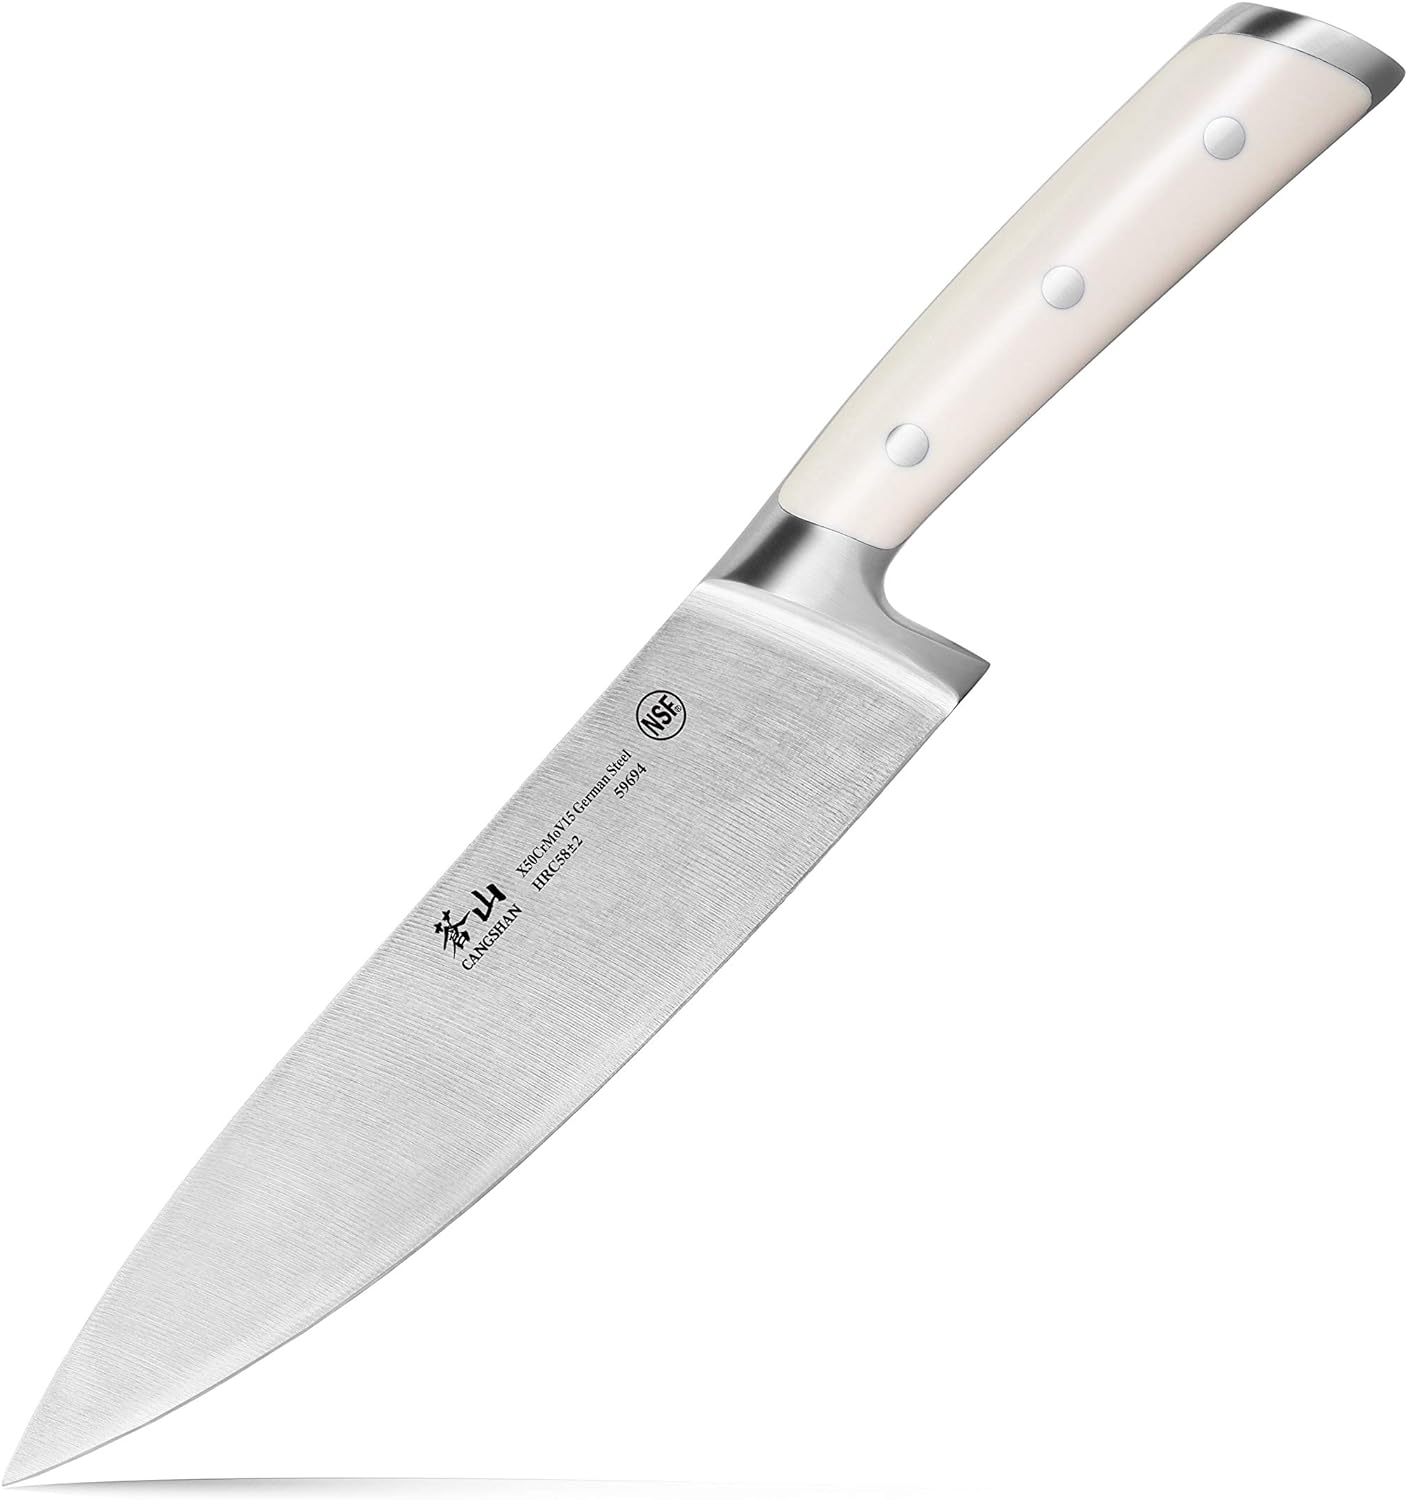 Unlock Your Savings Now! Get 33% Off Cangshan S1 Series 59694 German Steel Forged Chef Knife